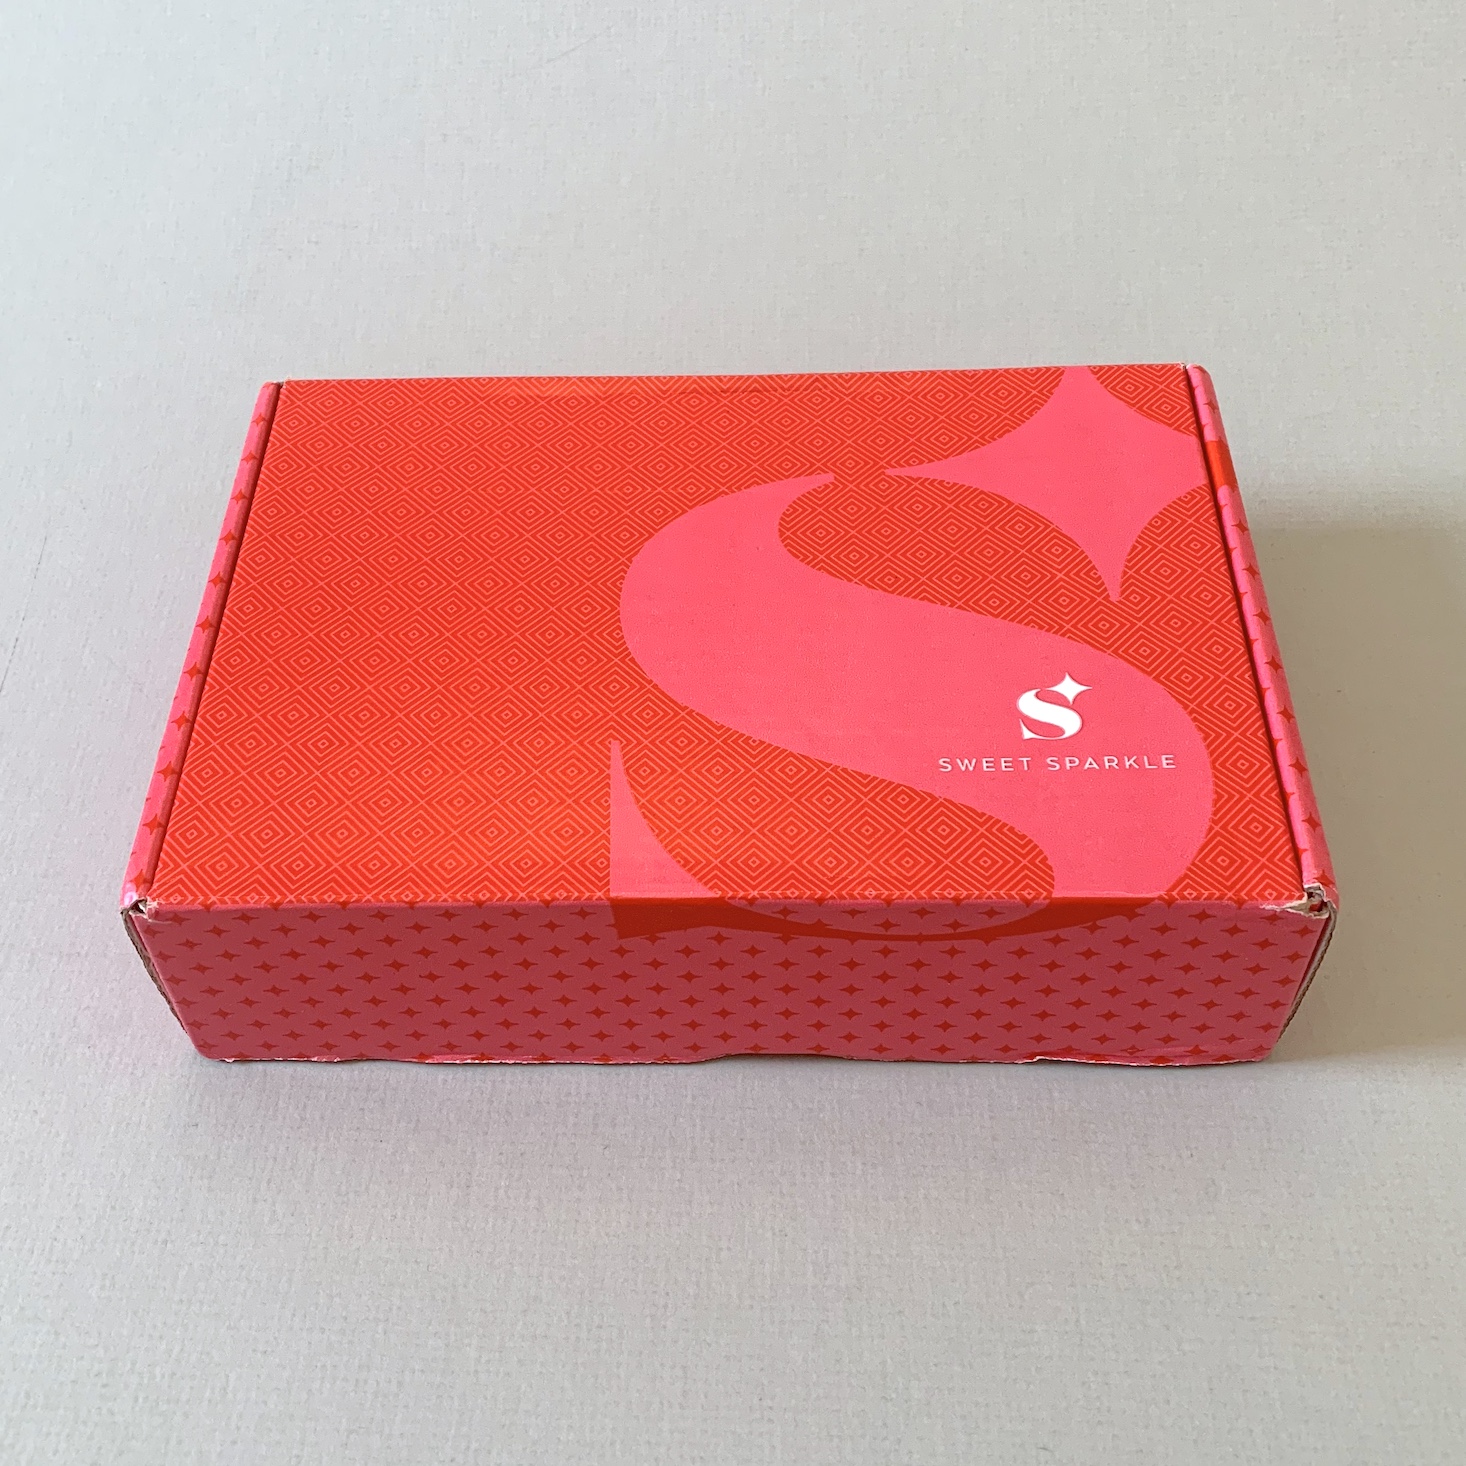 Sweet Sparkle Makeup Box Review + Coupon – March 2020